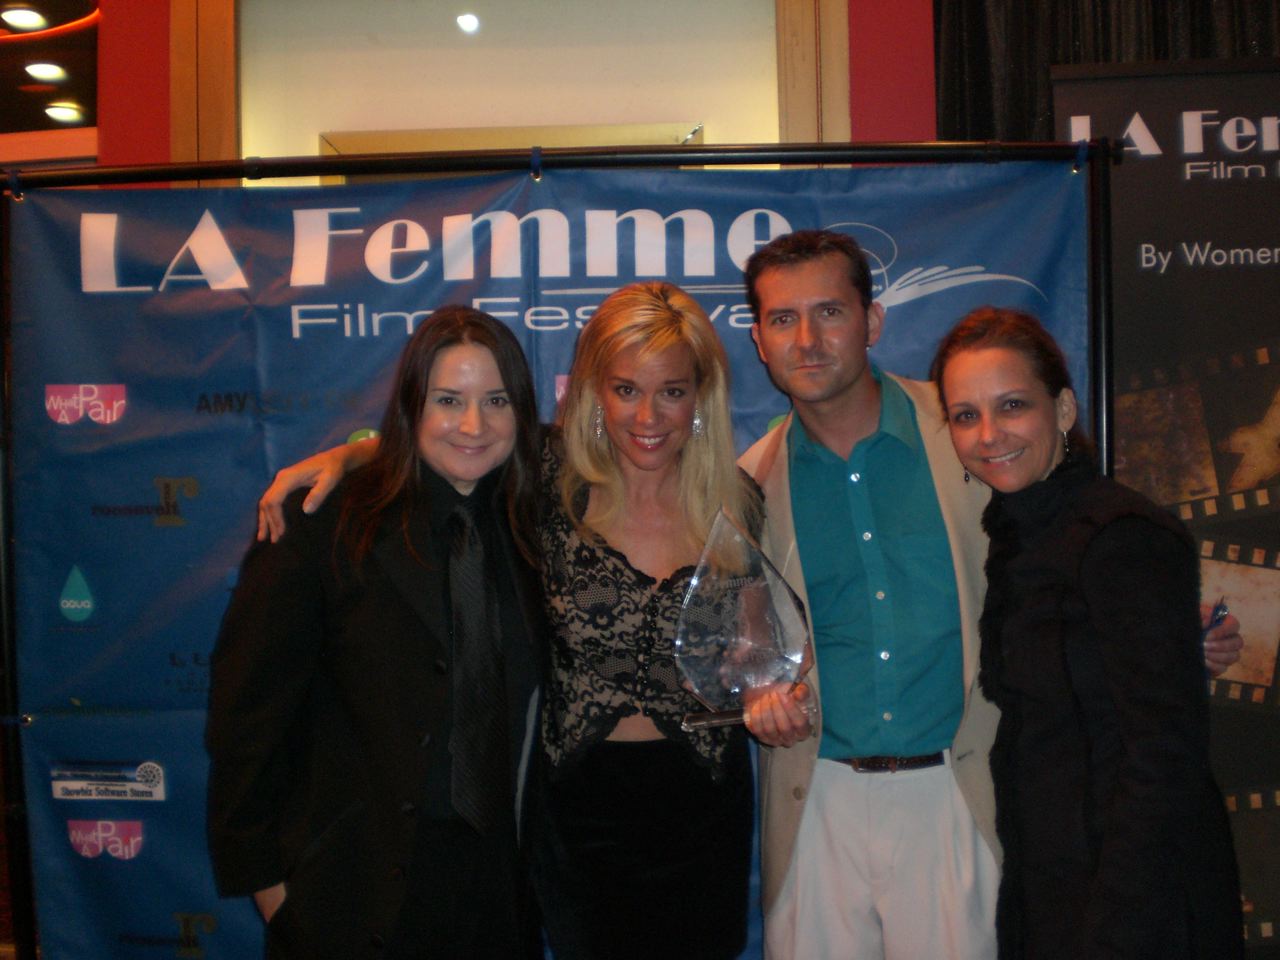 James Kerwin with Sandra Valls, Chase Masterson, Sarah Nean Bruce at La Femme Film Festival